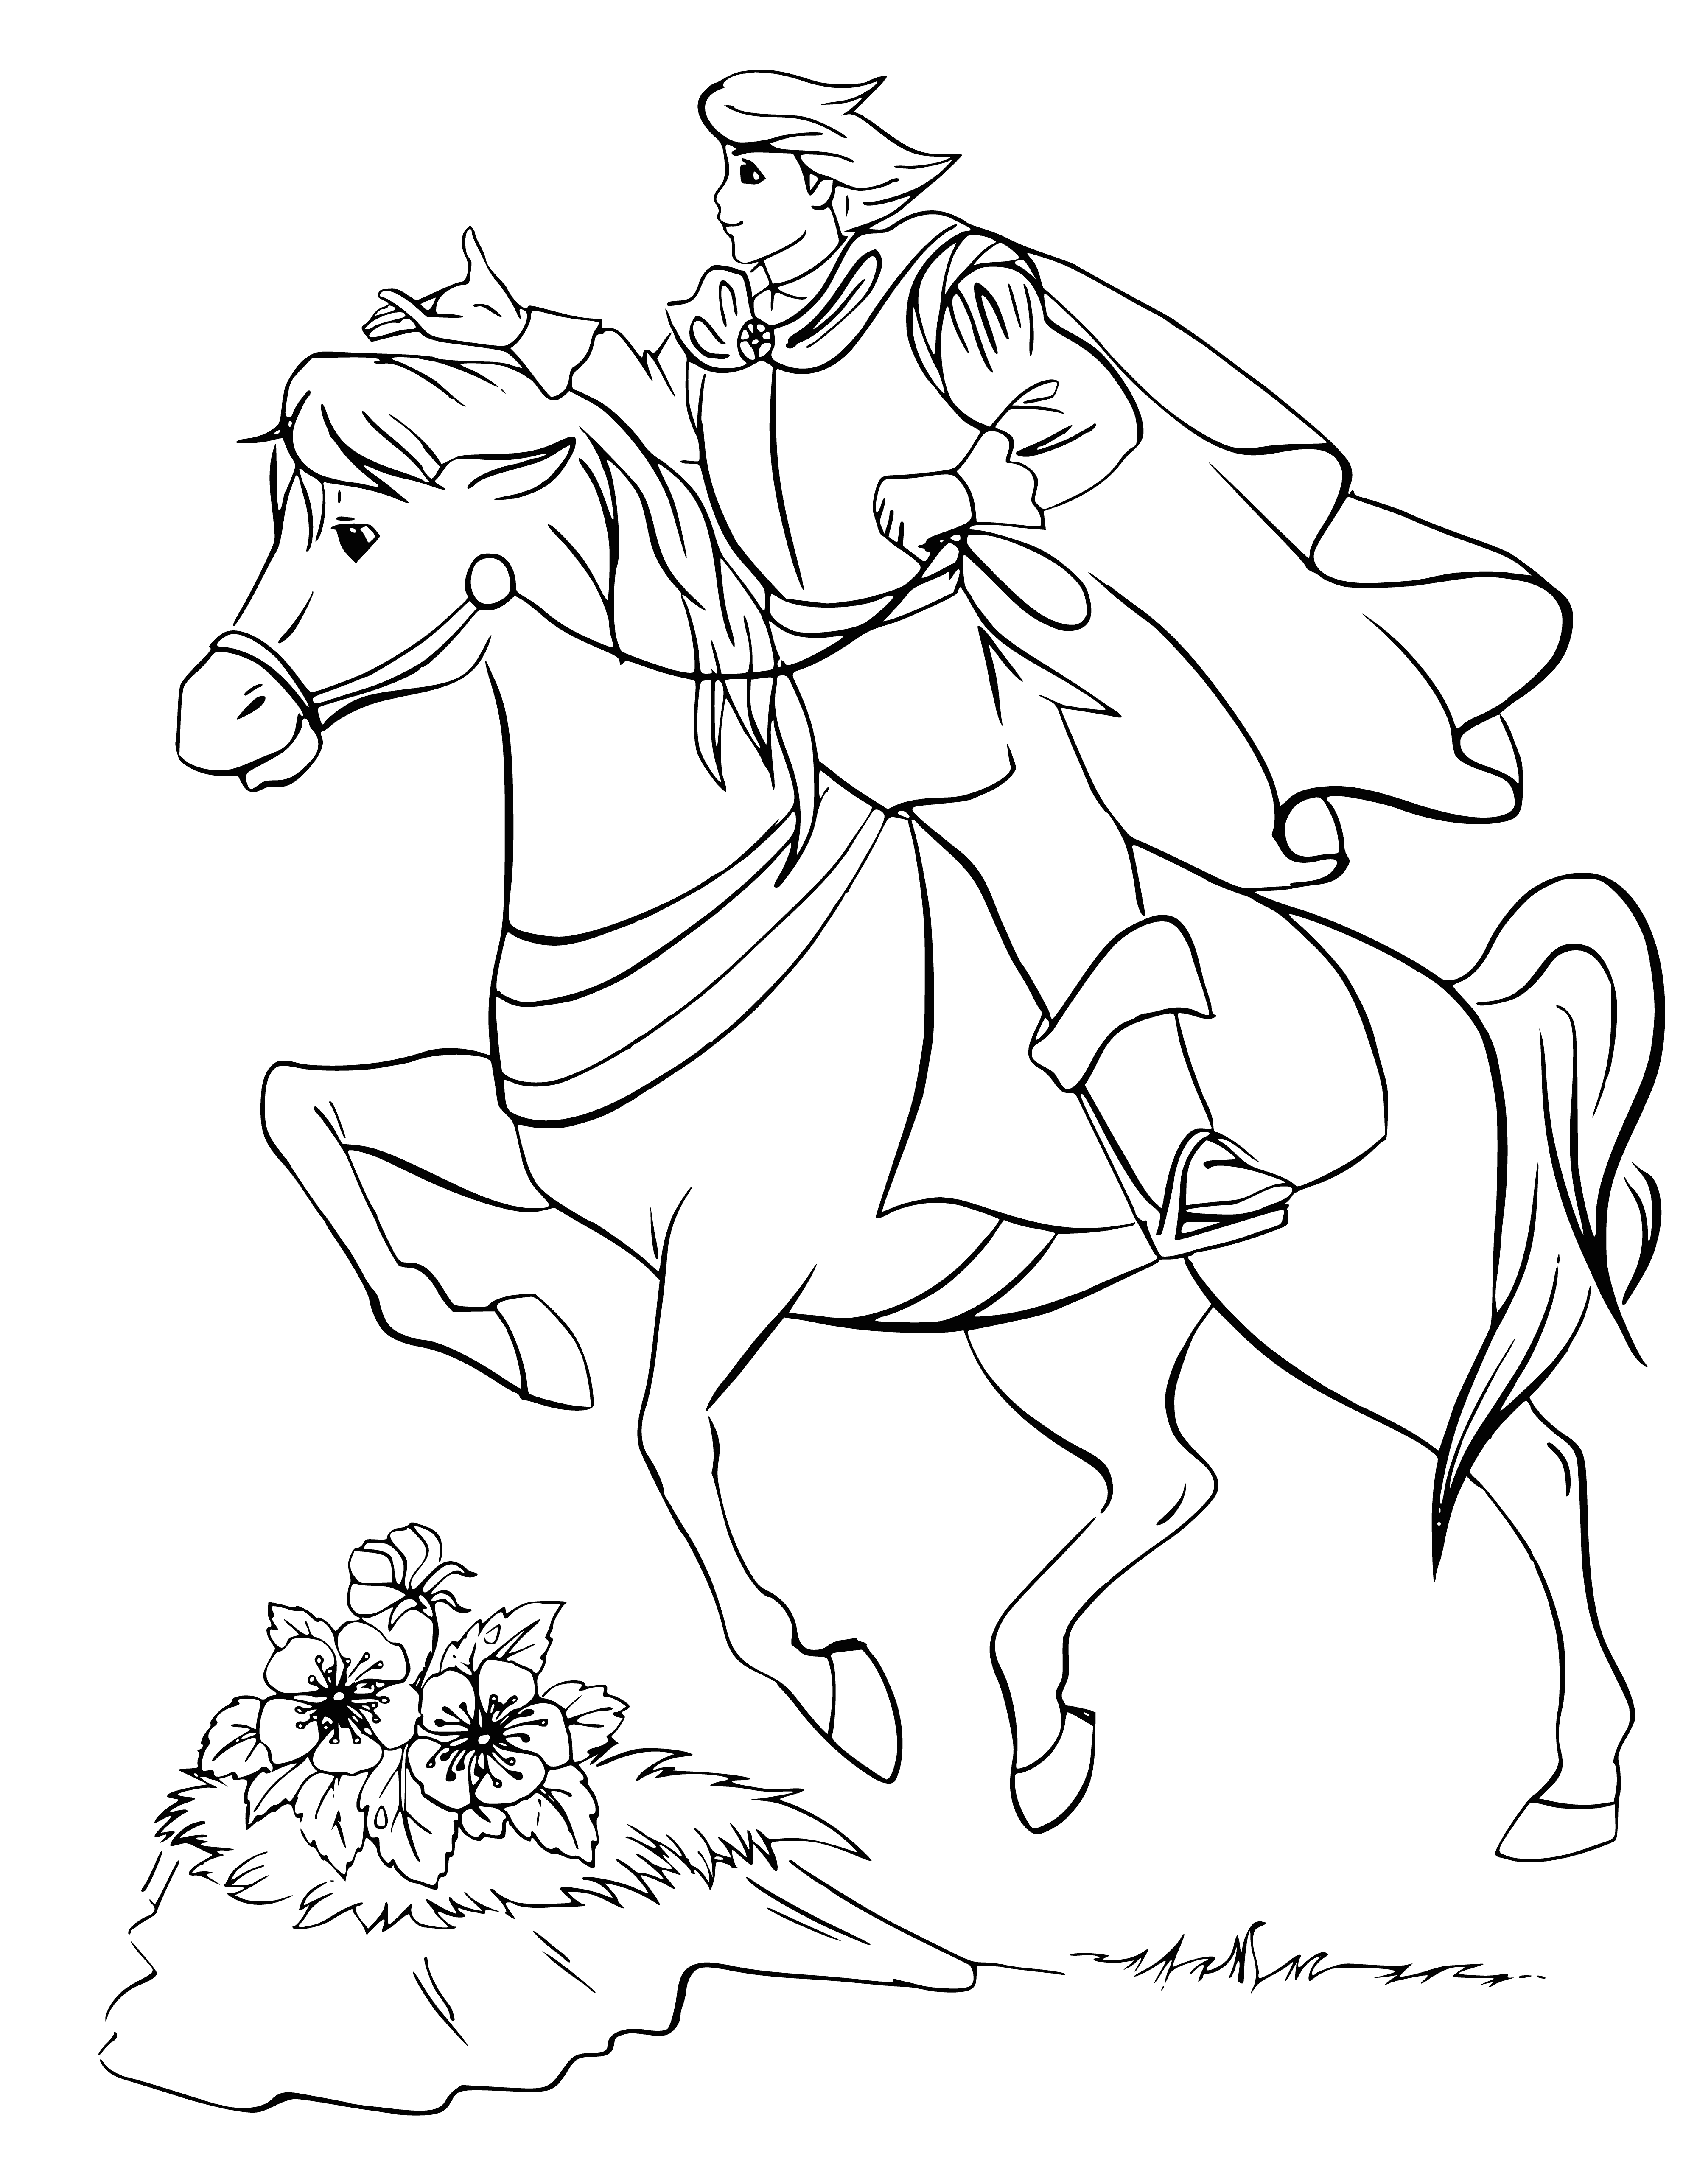 coloring page: Young princess stands in field with horses in white gown and crown; sash reads "Princess of Horses." Excited with horseshoe in hand.